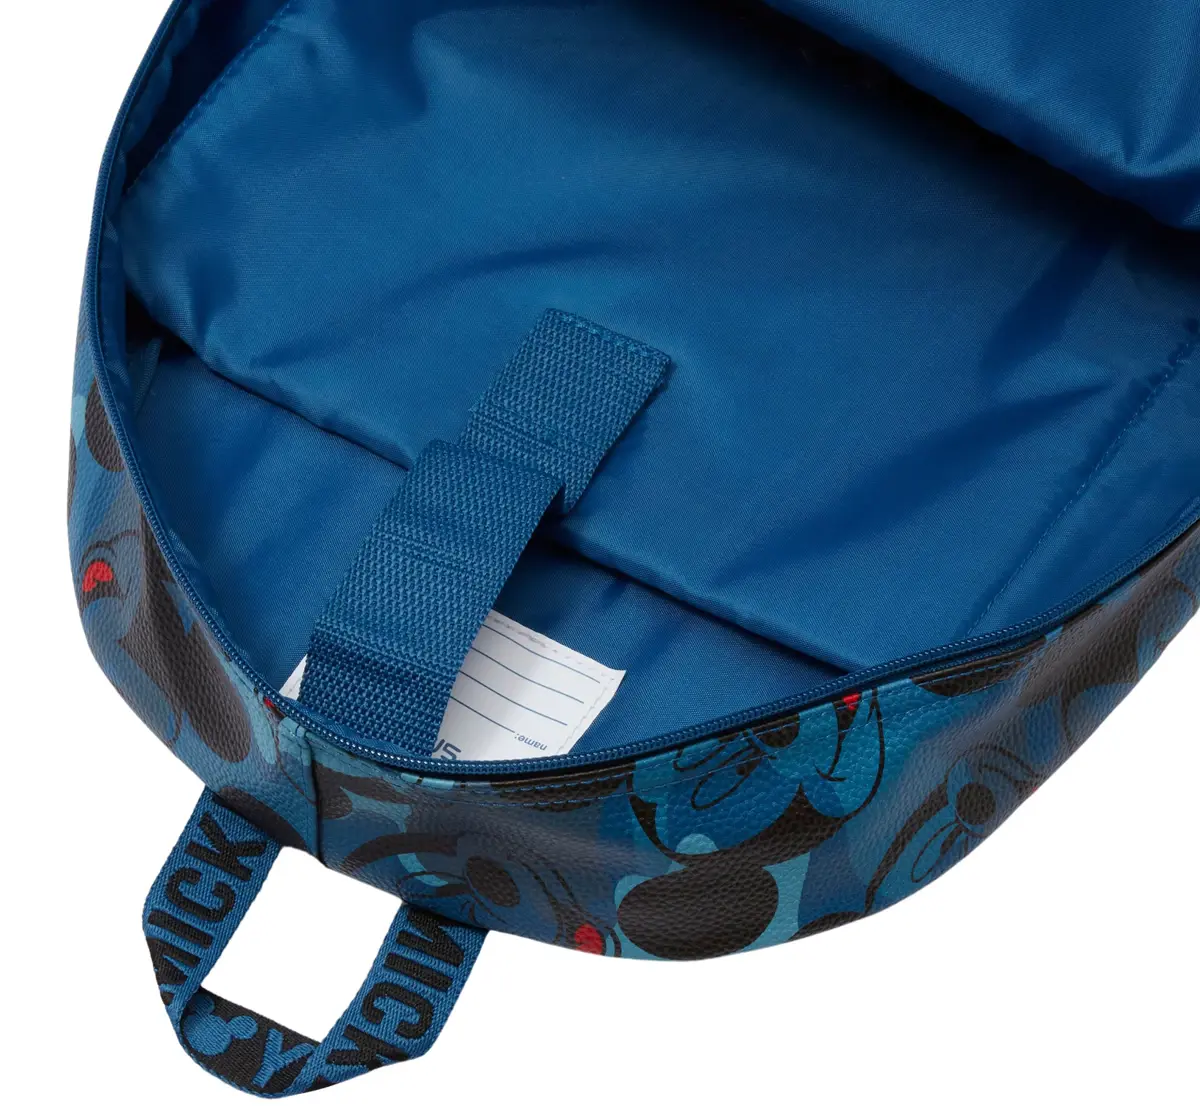 Smiggle Mickey Mouse Camouflage Backpack, Blue, 3Y+